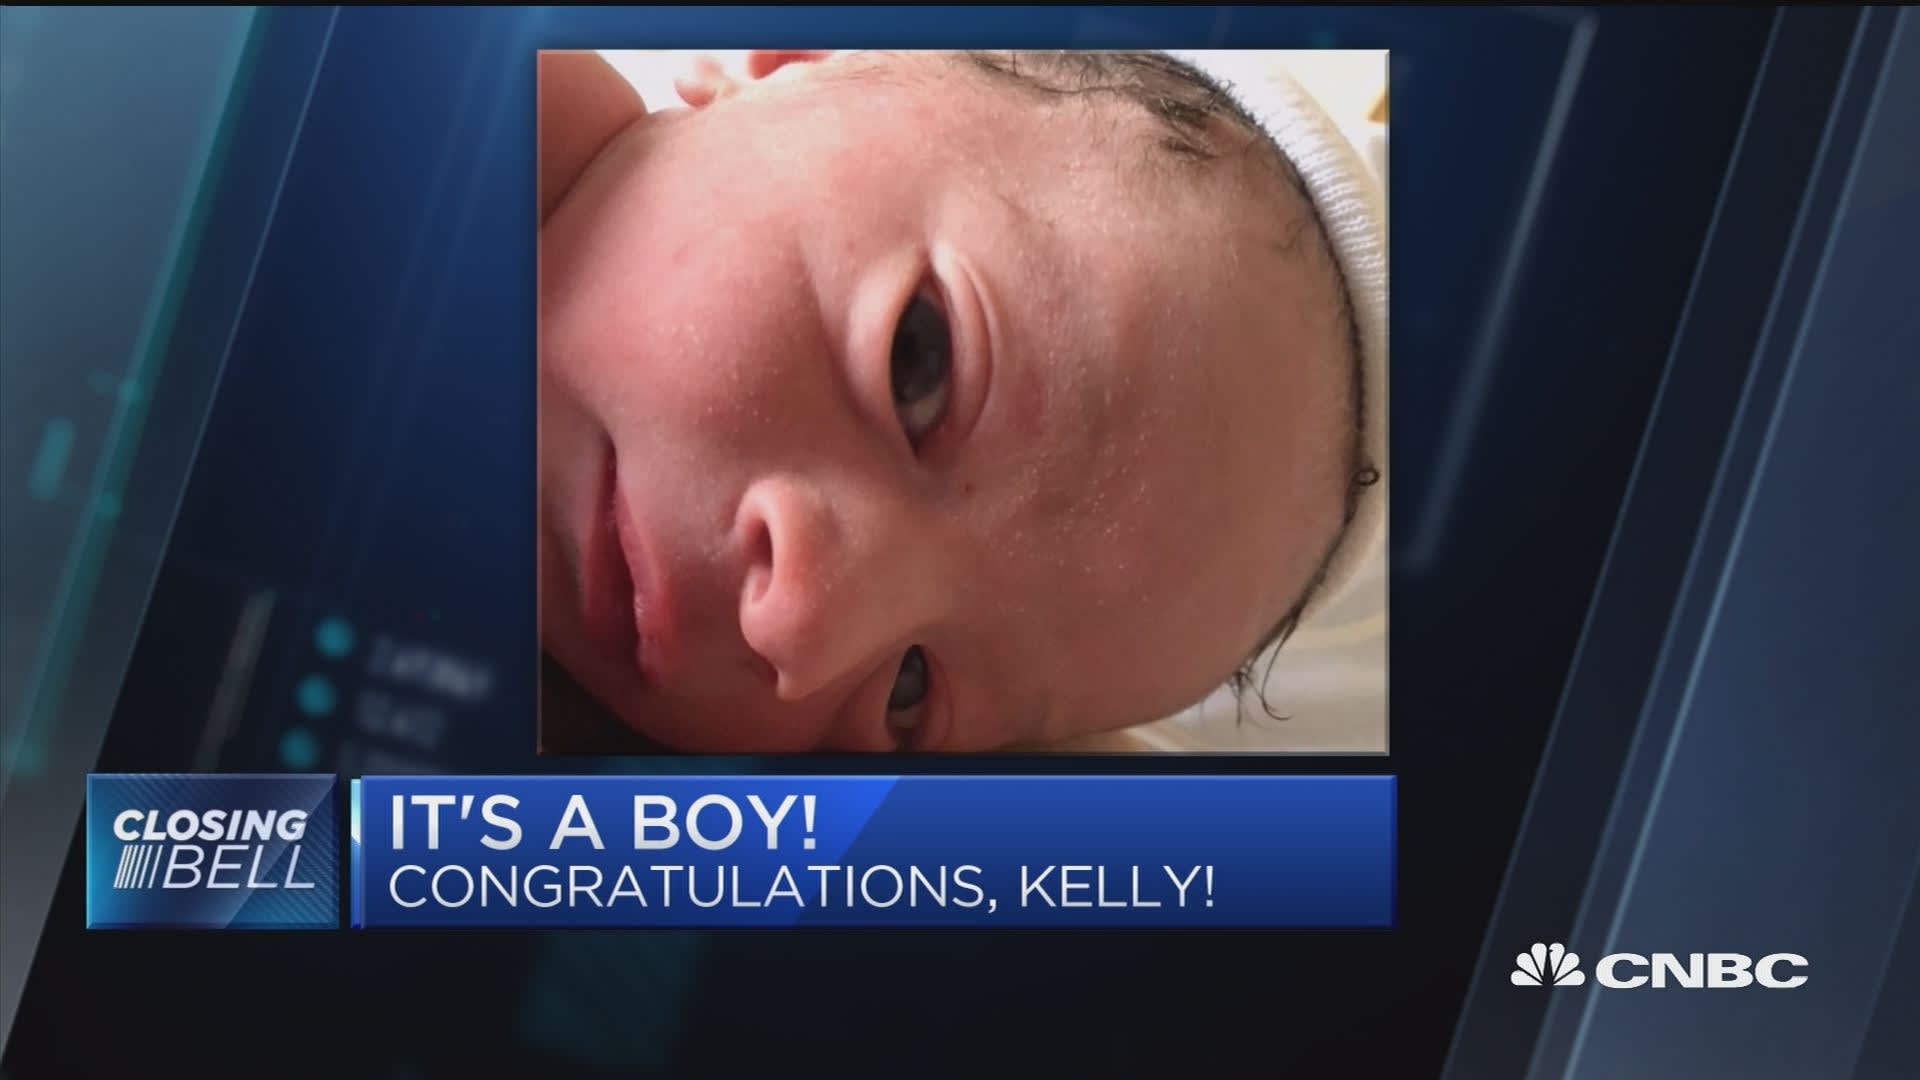 CNBC's Kelly Evans has a baby boy